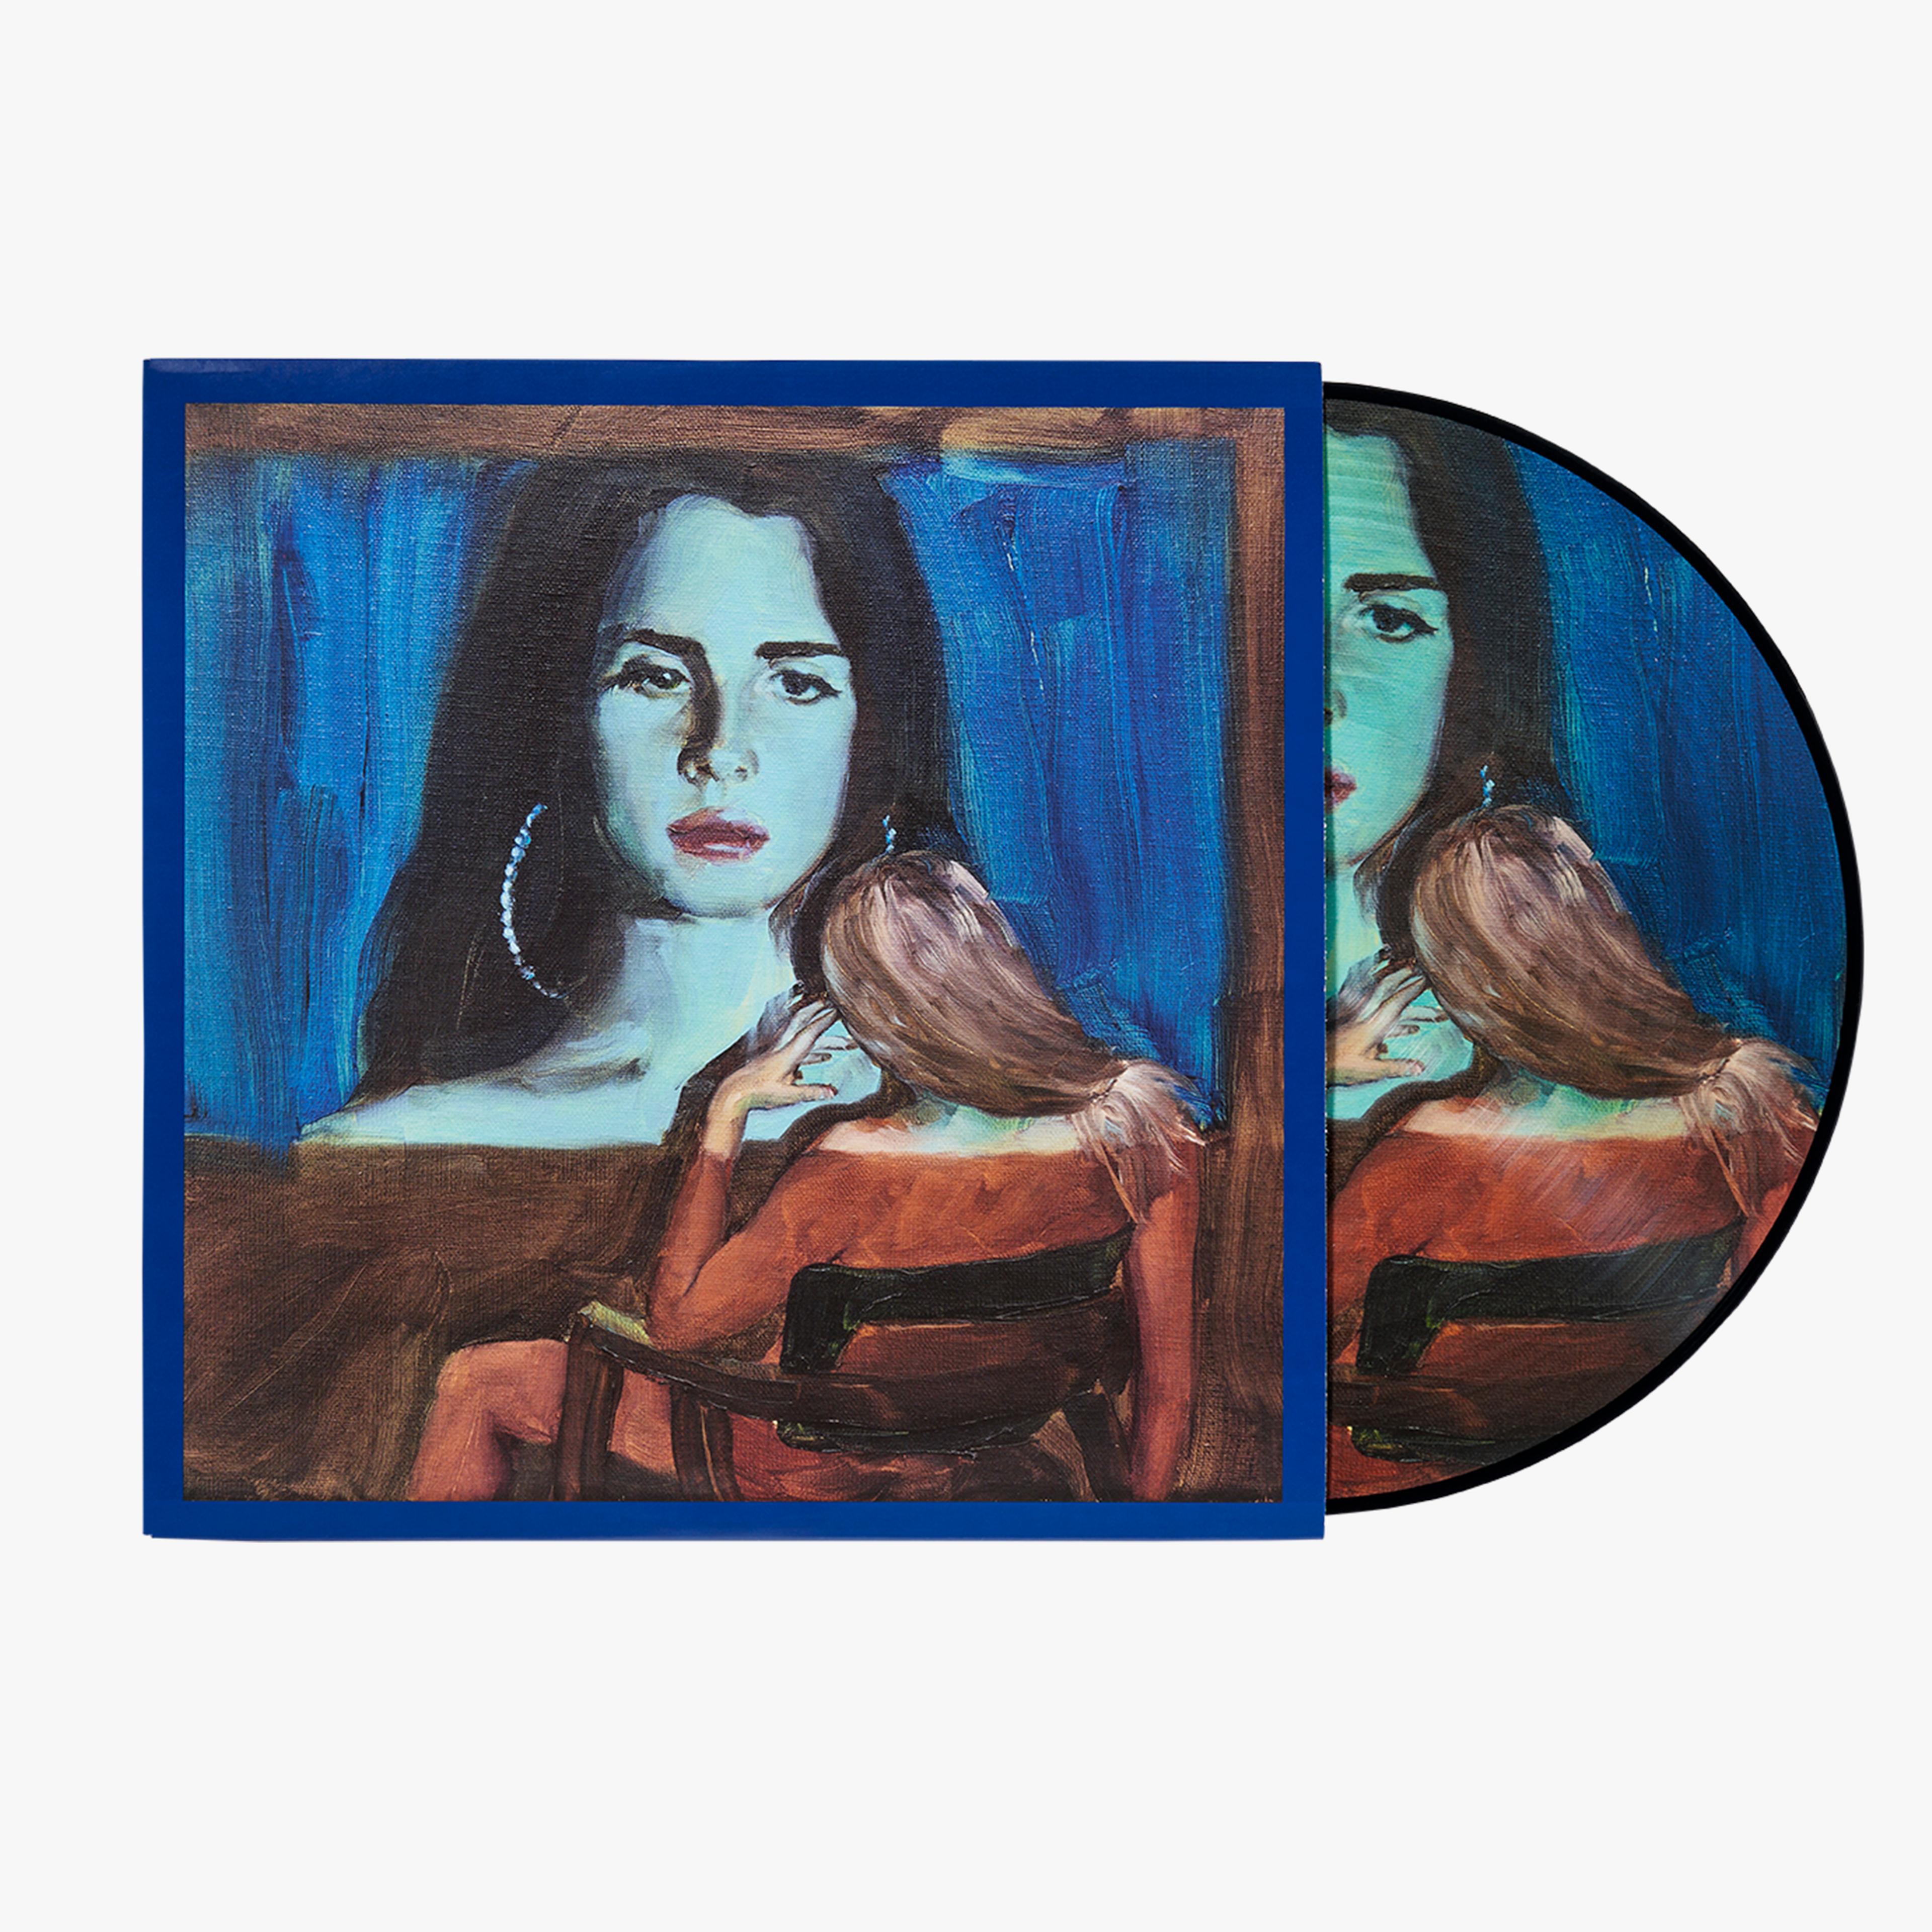 Lana Del Rey - Born To Die by Jenna Gribbon Gallery Picture Disc